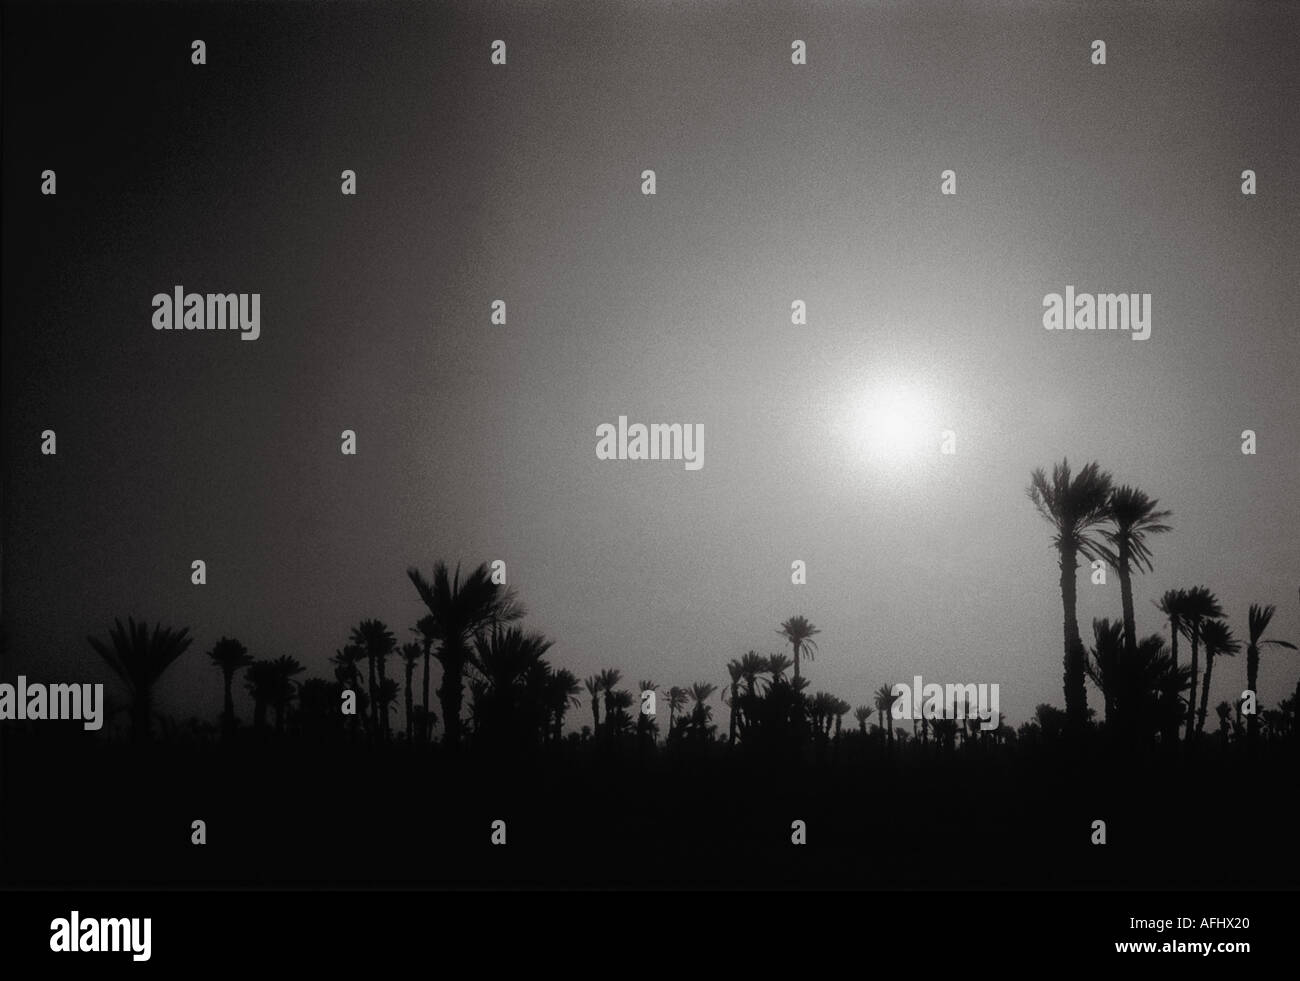 Palm Trees in Morocco Silhouetted Against Sunset Sky Stock Photo